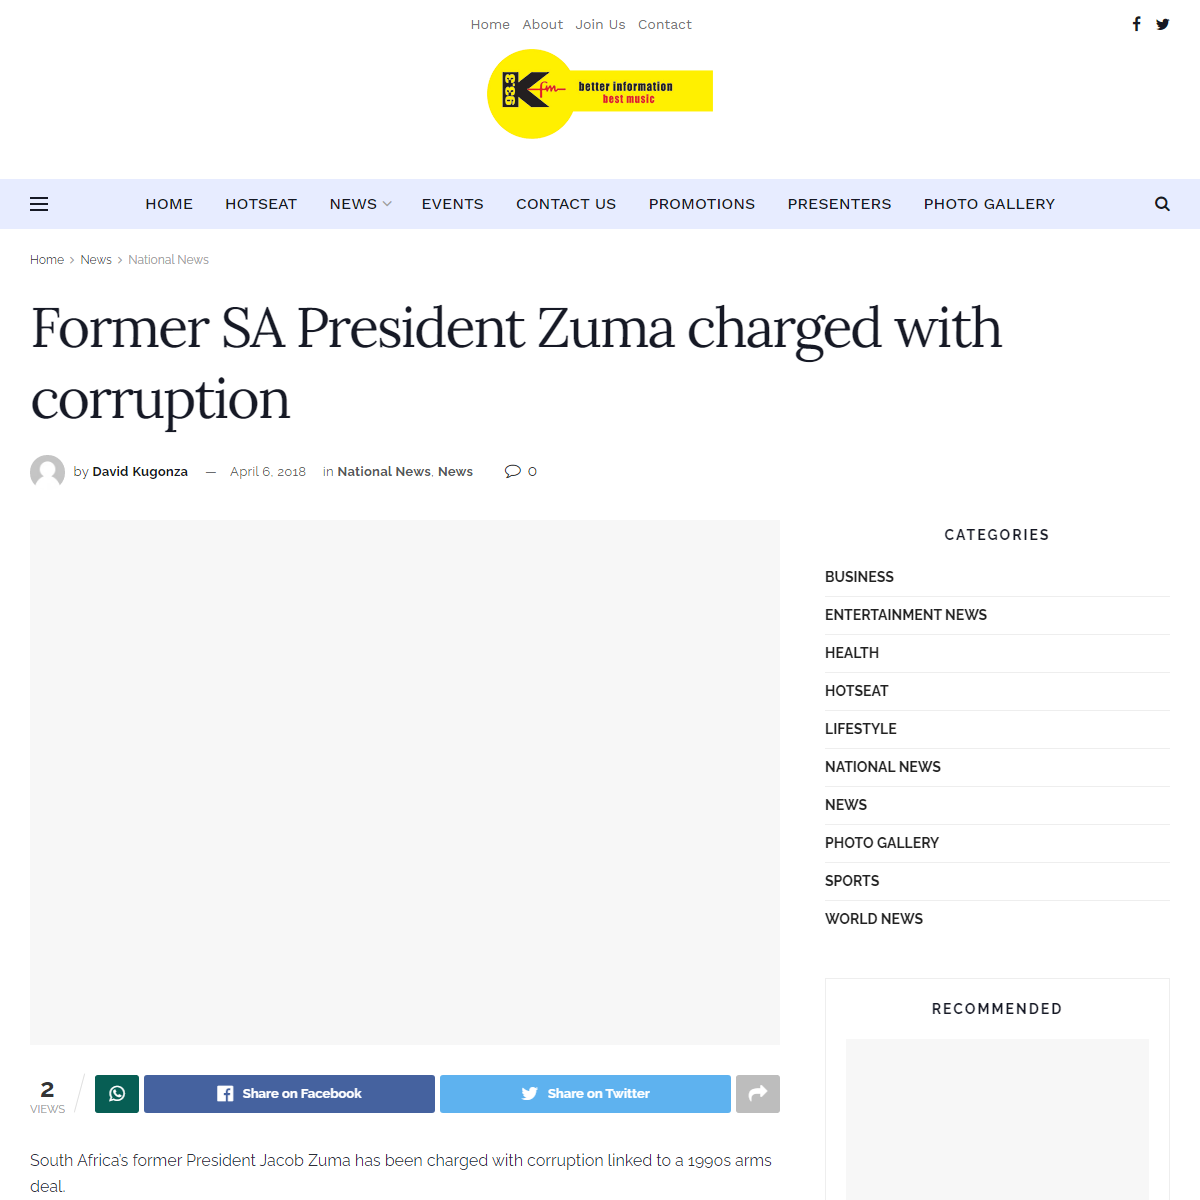 A complete backup of https://www.kfm.co.ug/news/former-sa-president-zuma-charged-with-corruption.html